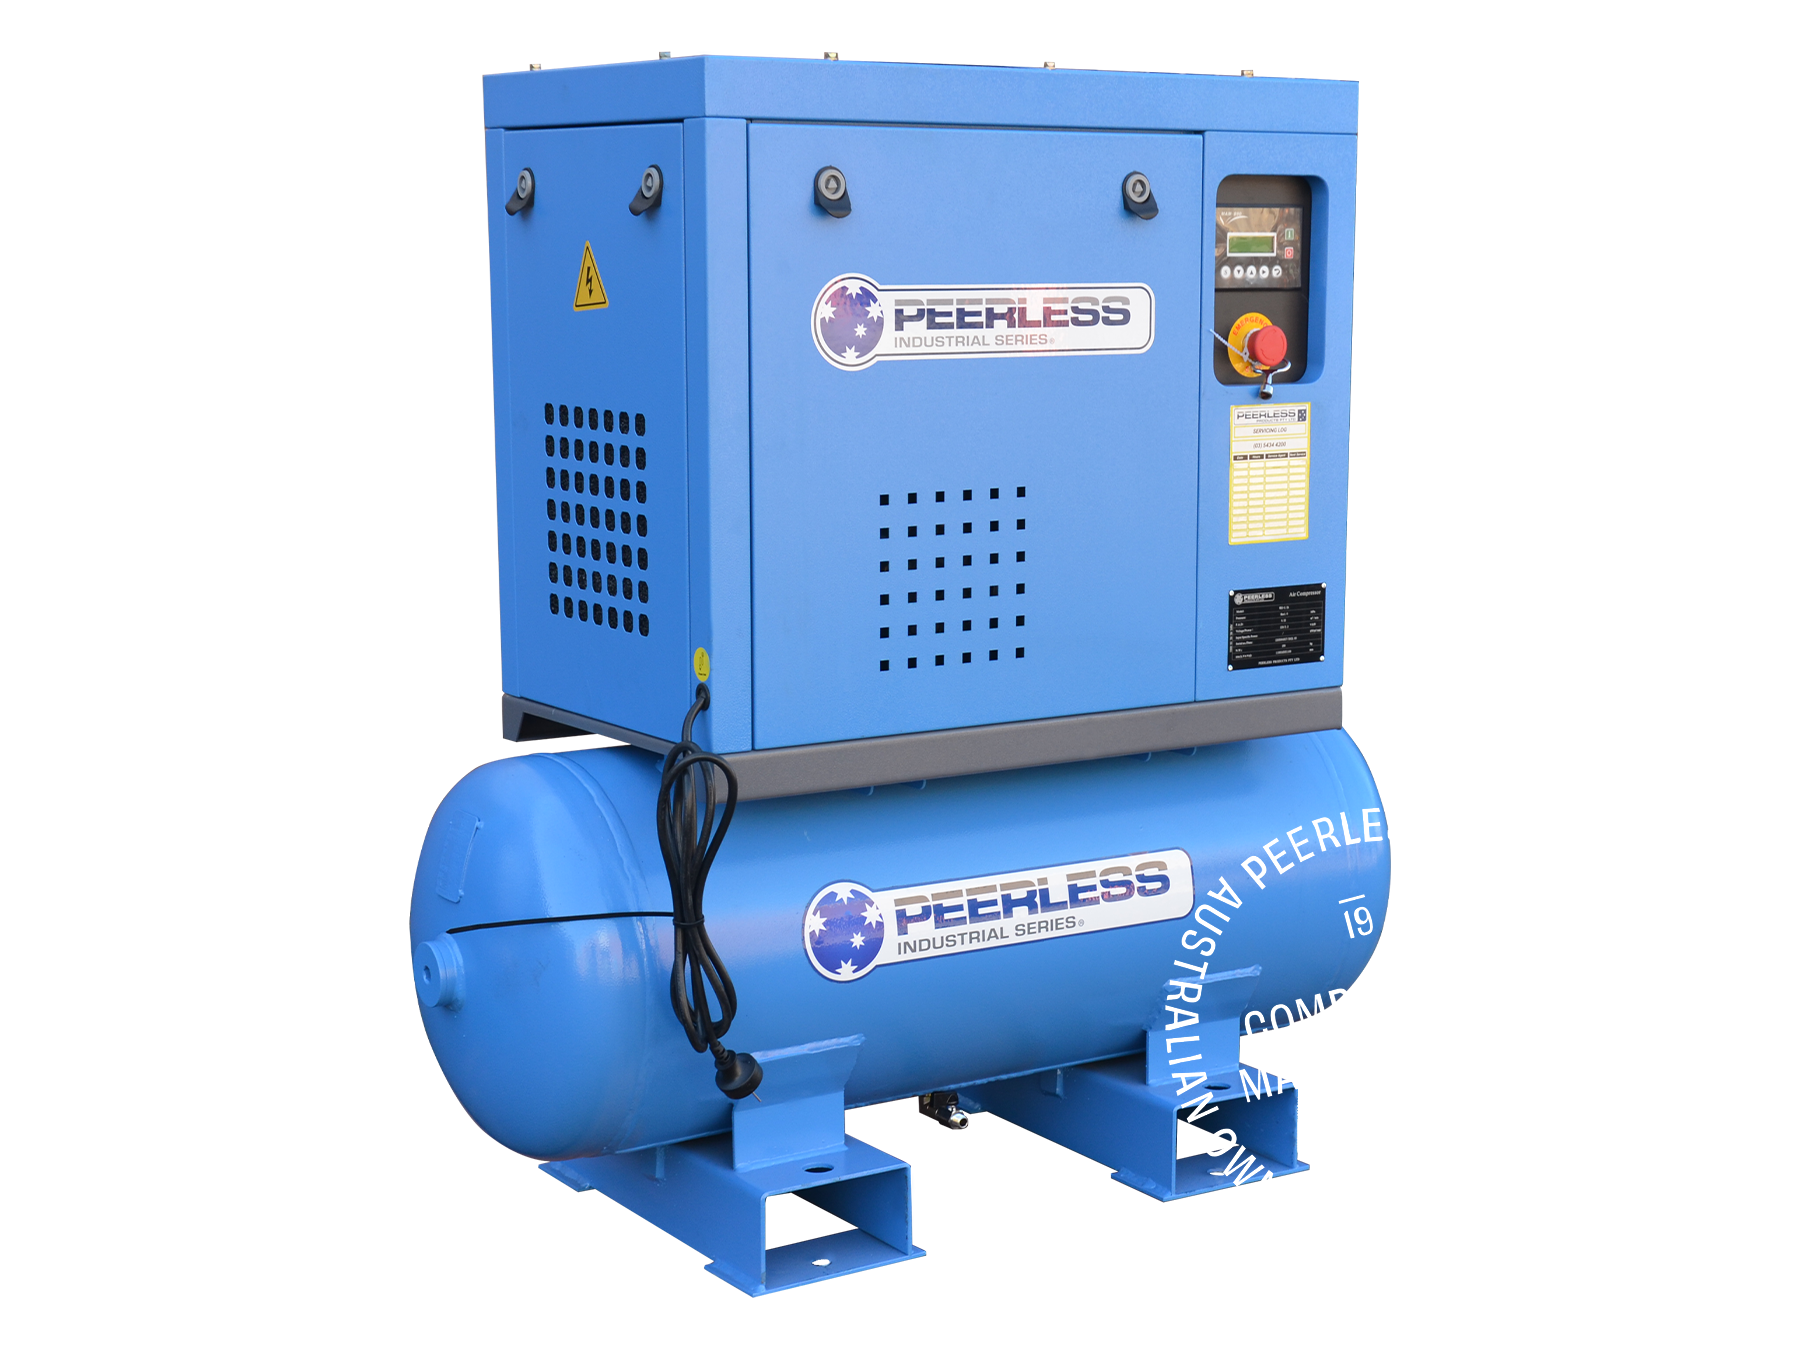 PS3/10HP Single Phase Rotary Screw Air Compressor: Belt Drive, 15Amp, 3HP, 270LPM at 10Bar - for High Pressure